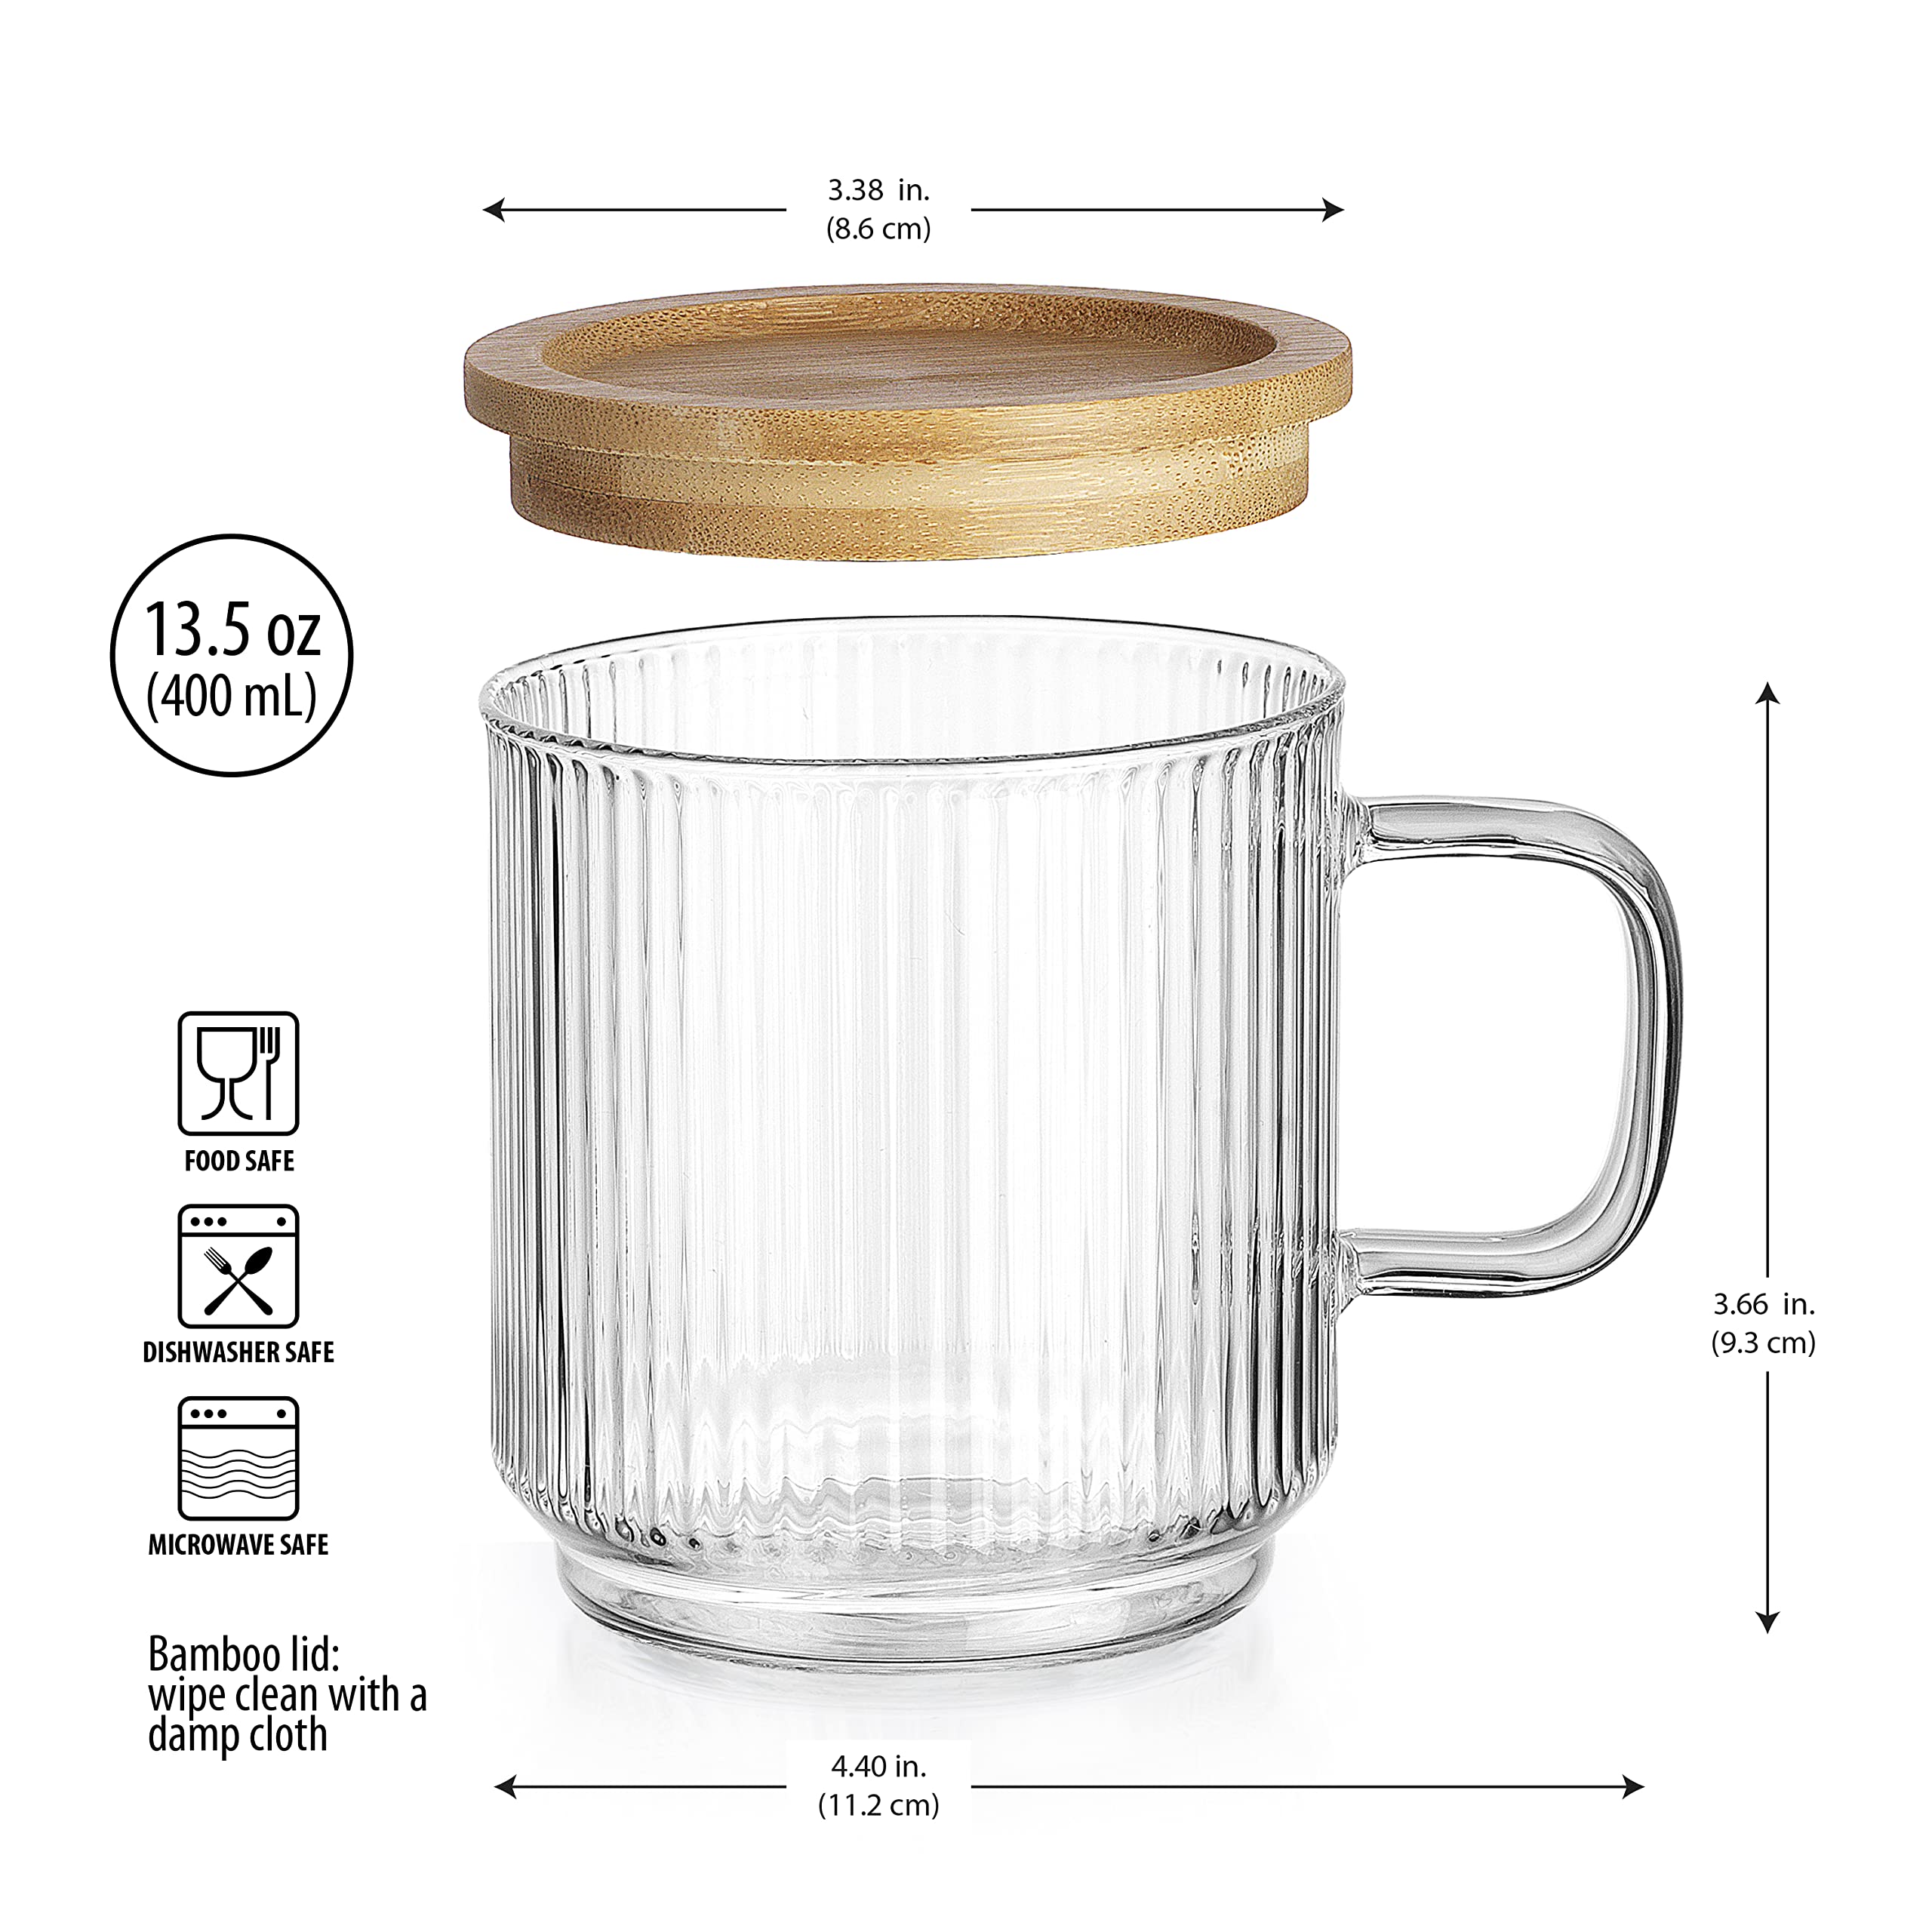 Glaver's Coffee Mug with Lid Borosillcate Glass Set of 2, 12 oz Ribbed Tea Cup With Bamboo Lid and or Coaster 2in1. For Espresso, Mocha, Cappuccino.